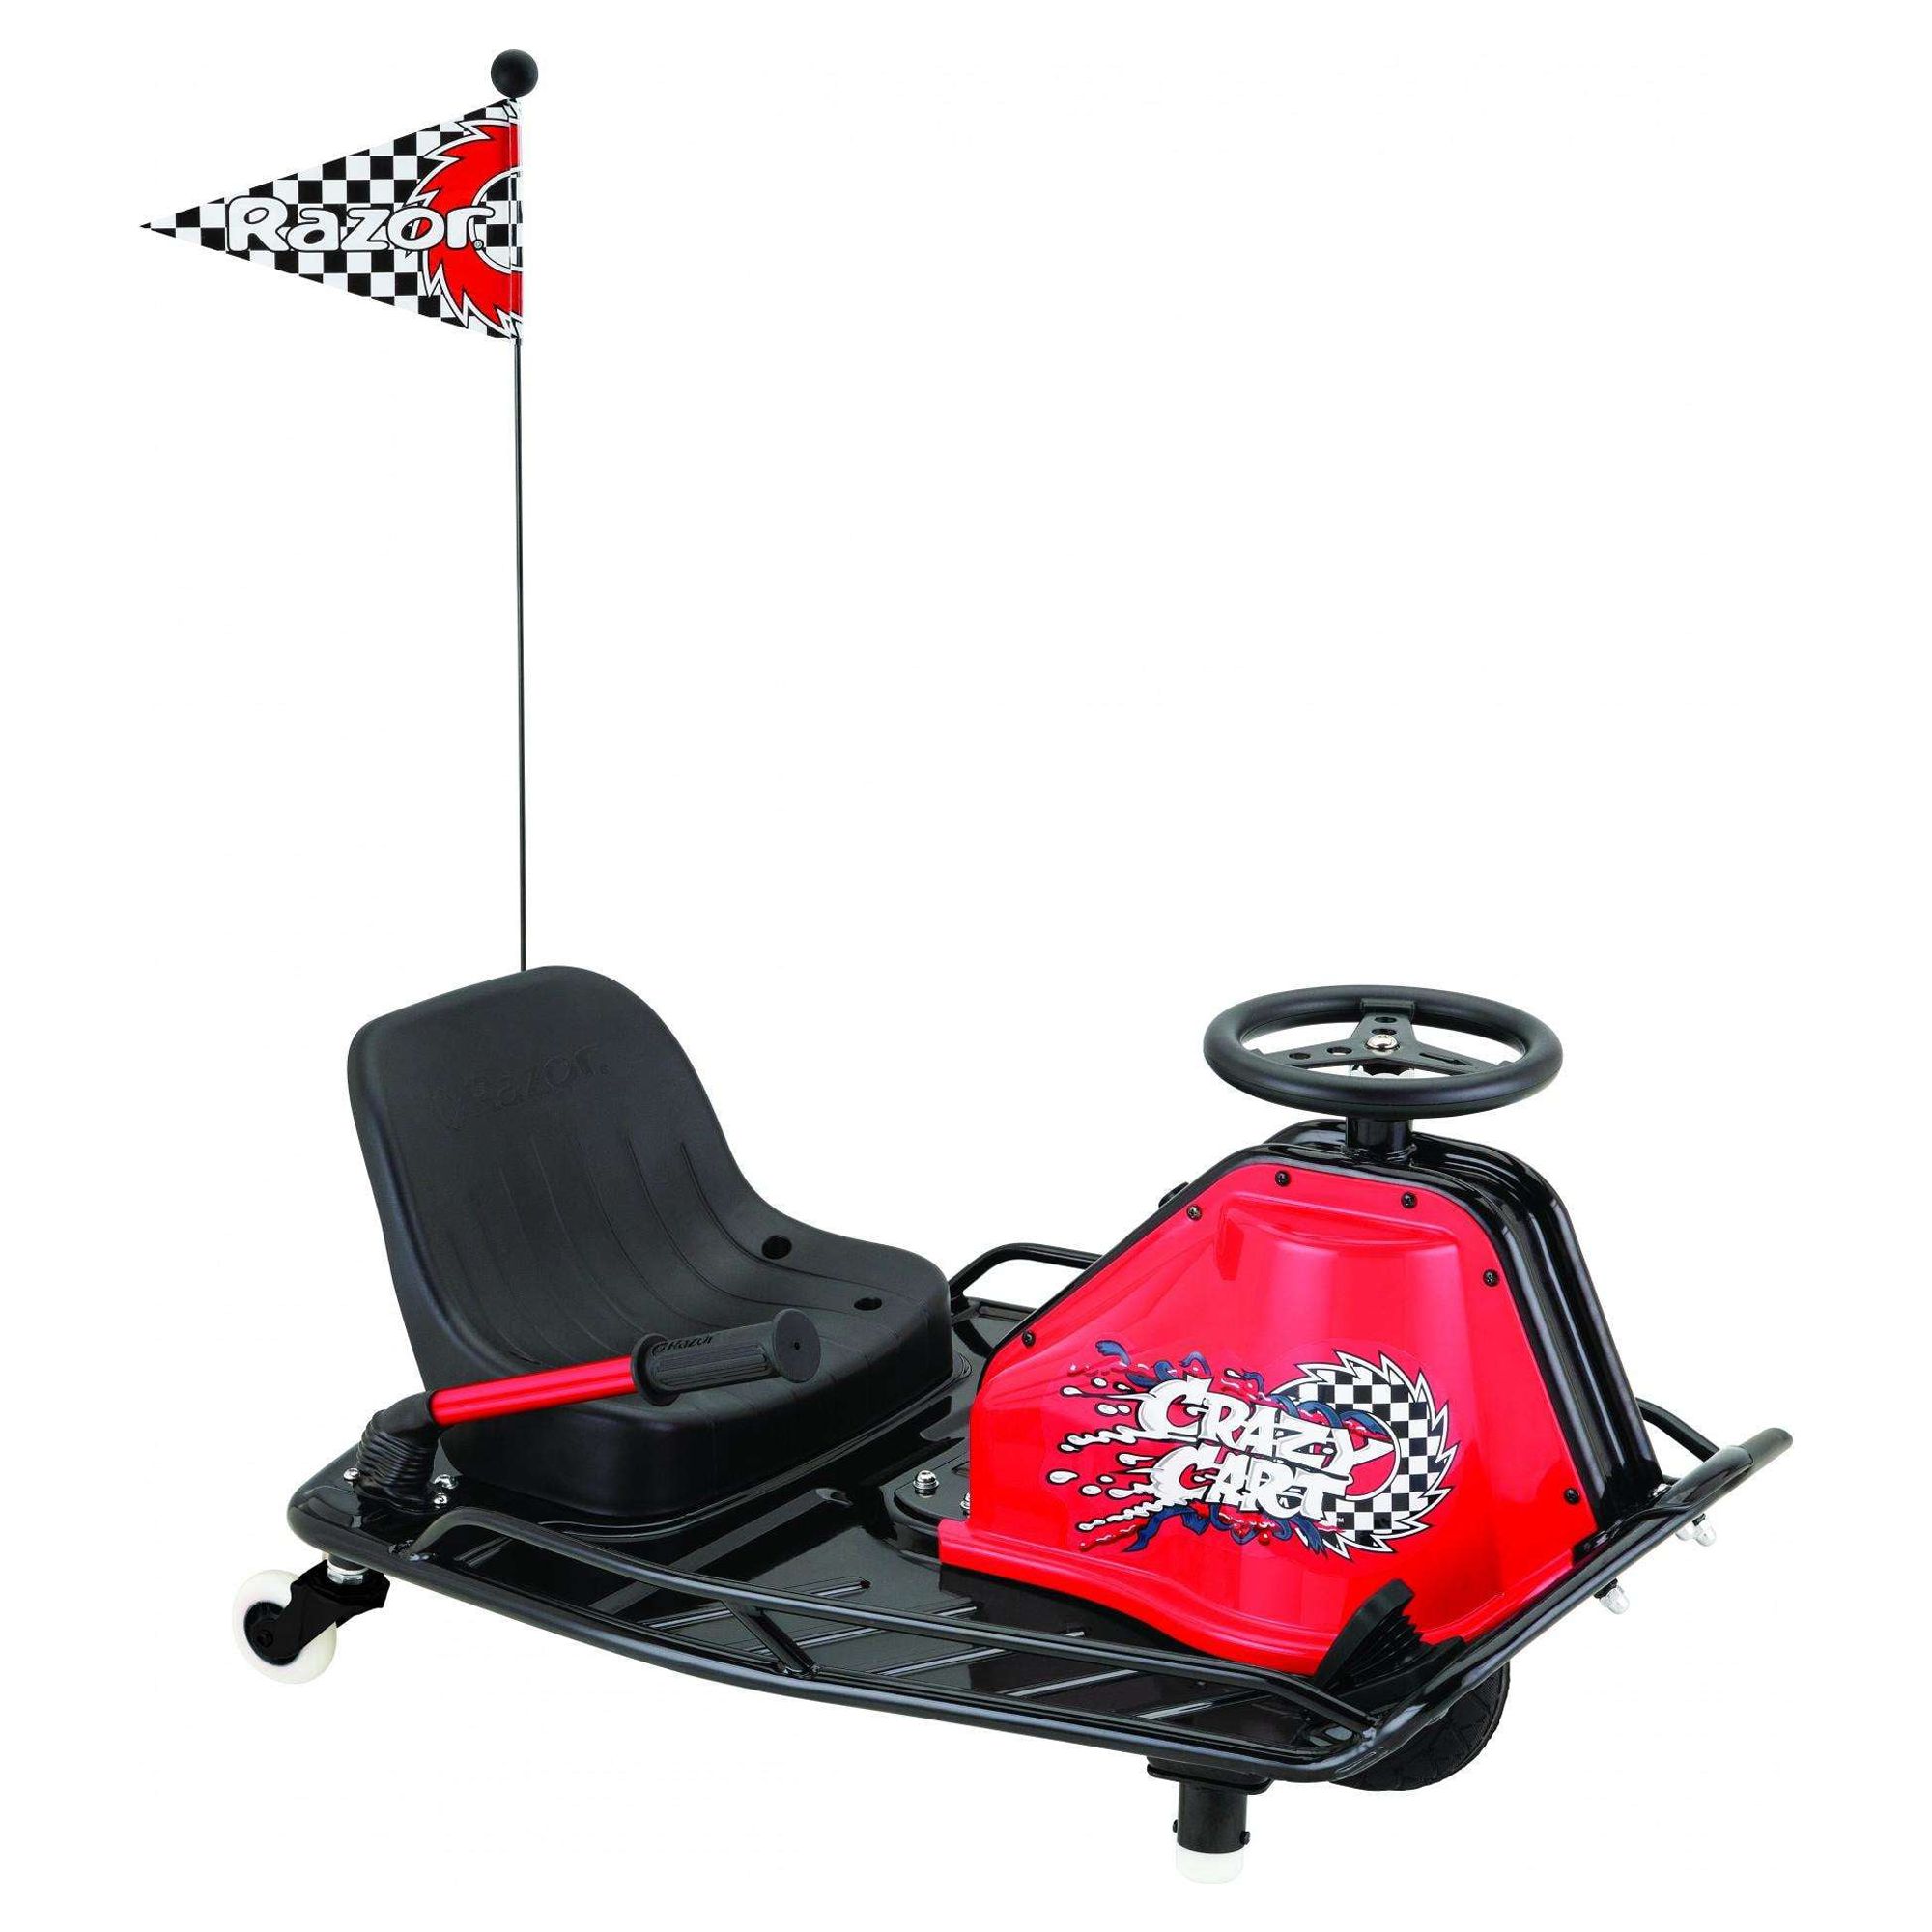 Razor Crazy Cart - 24V Electric Drifting Go Kart - Variable Speed, Up to 12 mph, Drift Bar for Controlled Drifts - image 1 of 15